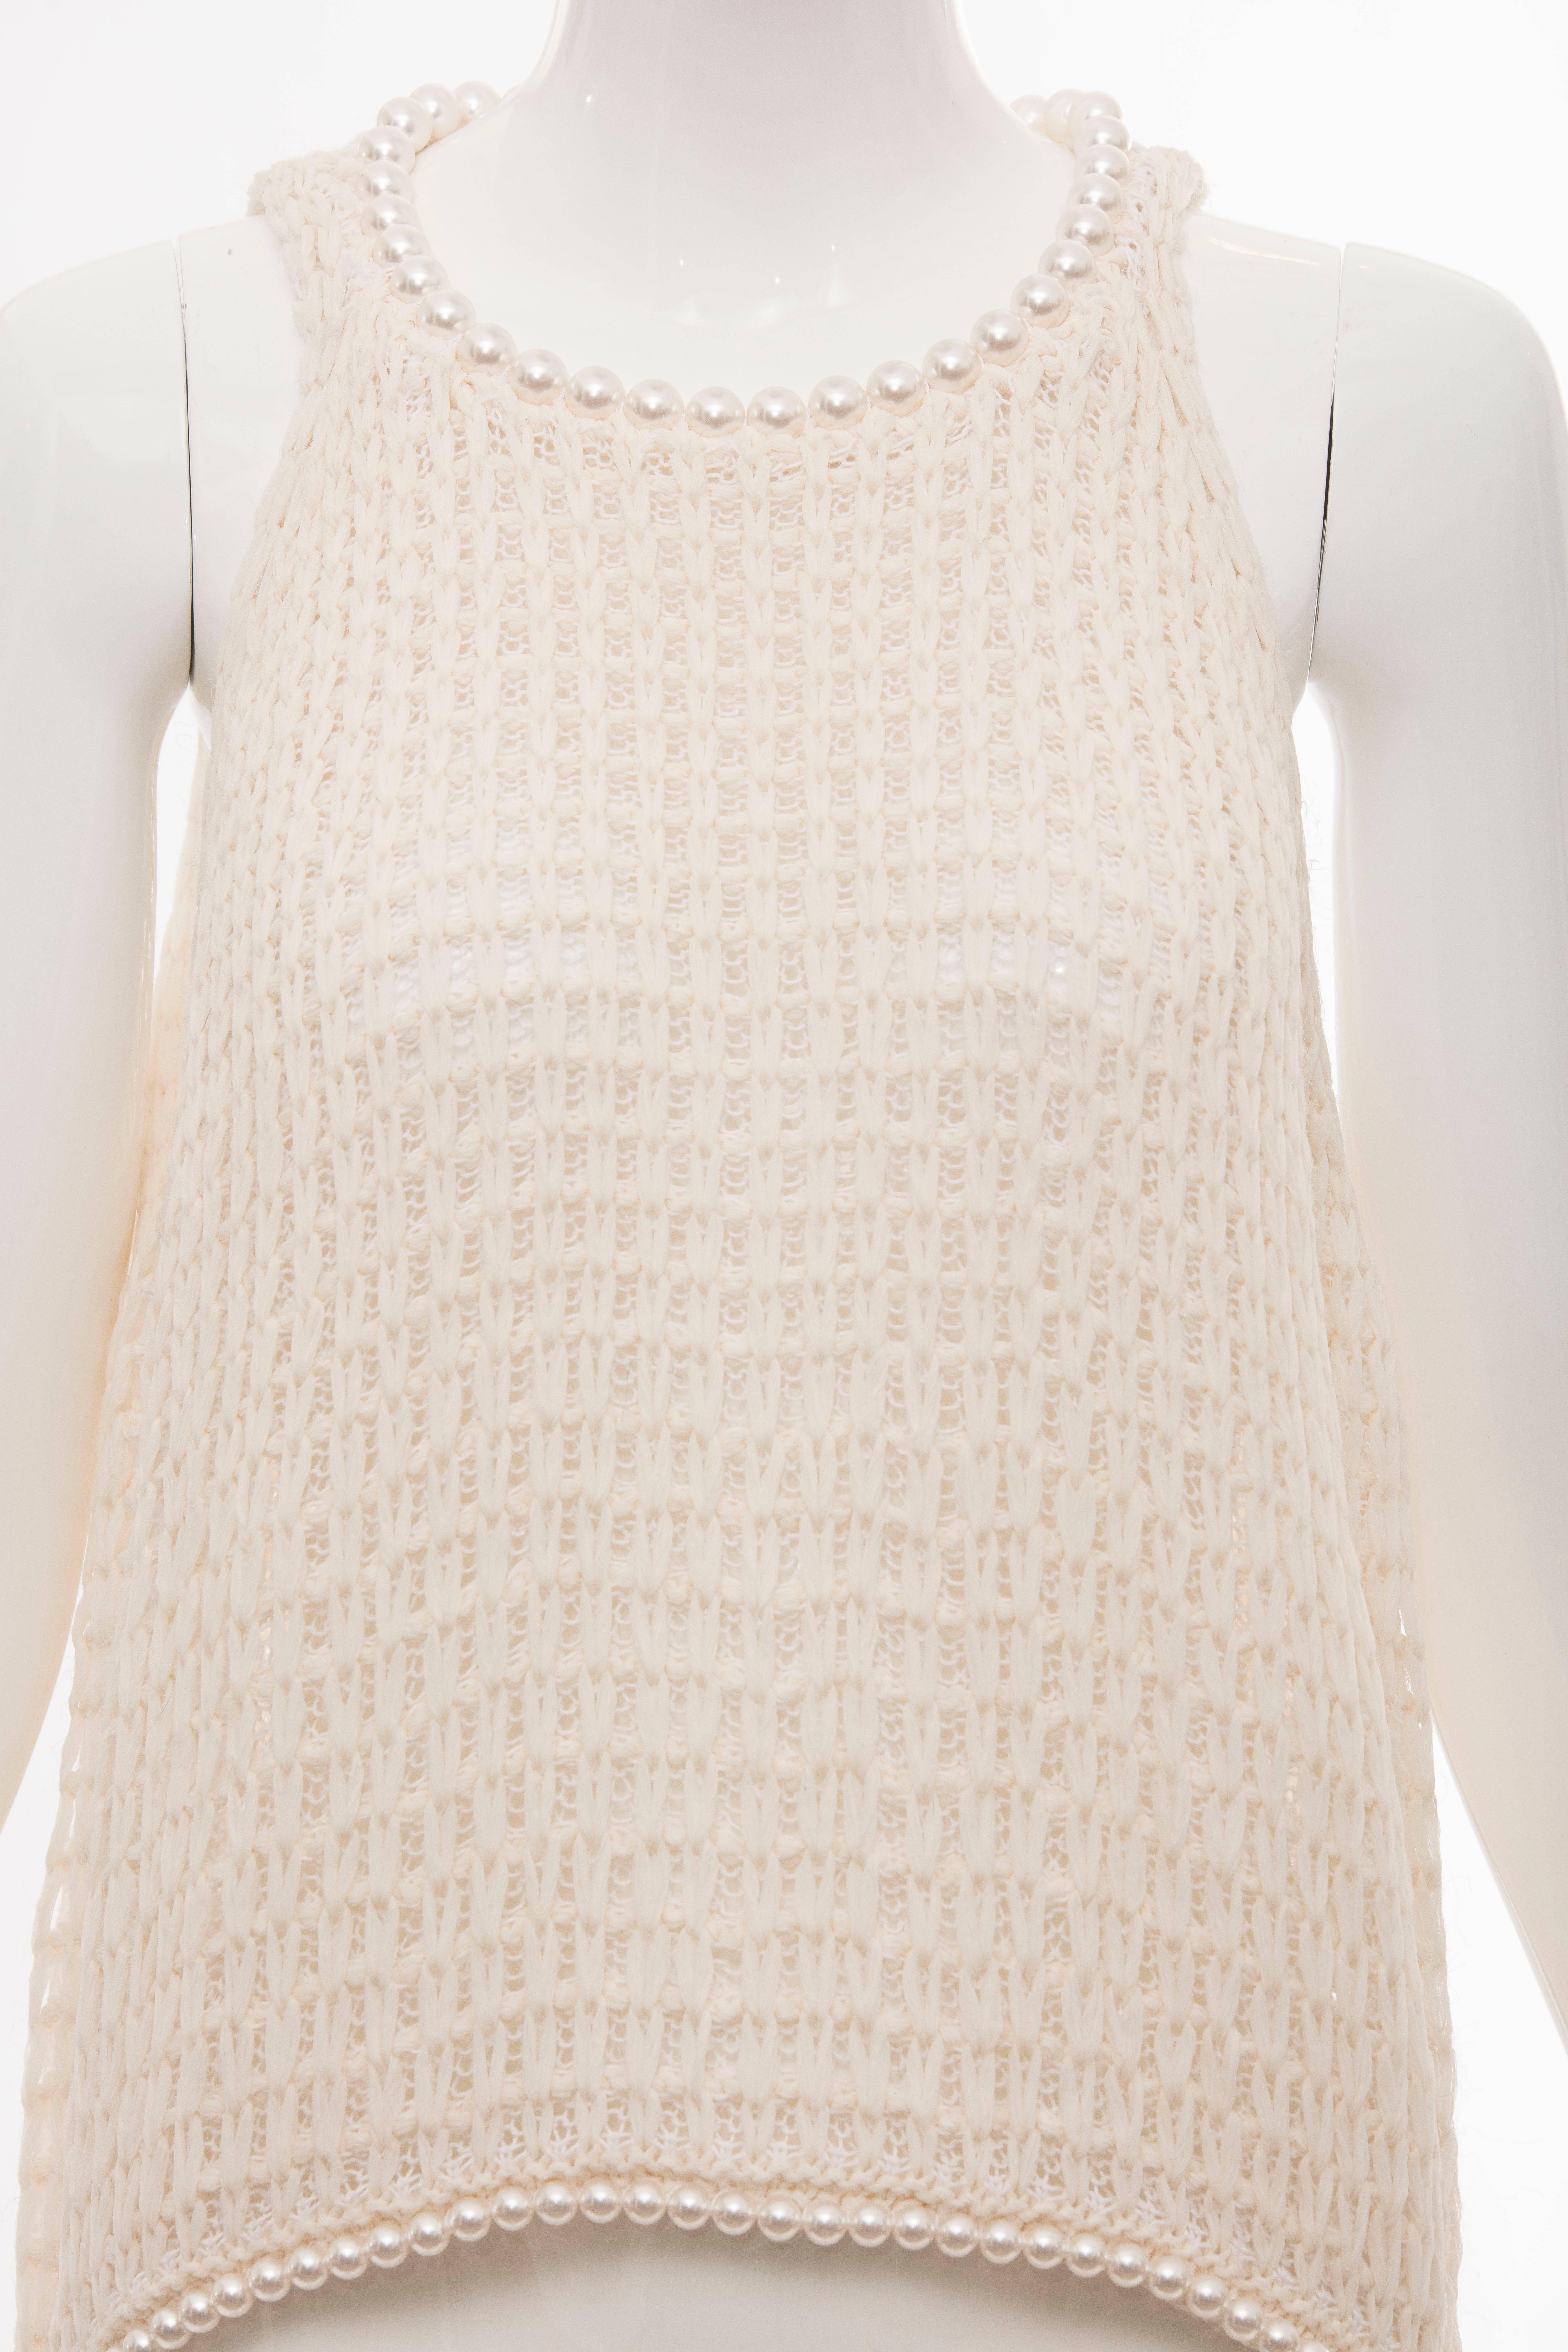 Chanel Cream Silk Blend Open Knit Top With Pearl Embellishments, Spring 2009 In Excellent Condition For Sale In Cincinnati, OH